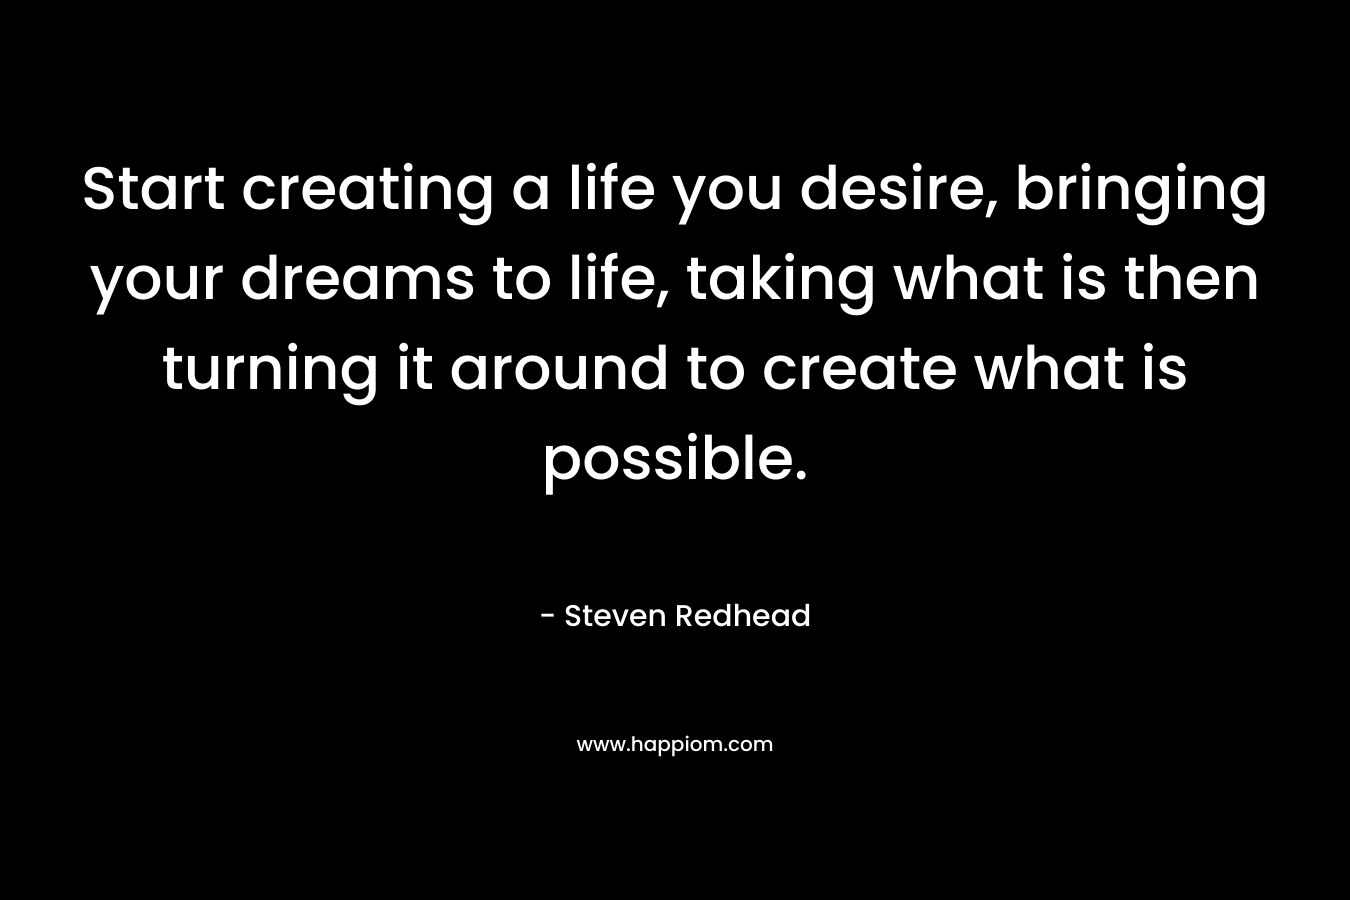 Start creating a life you desire, bringing your dreams to life, taking what is then turning it around to create what is possible.